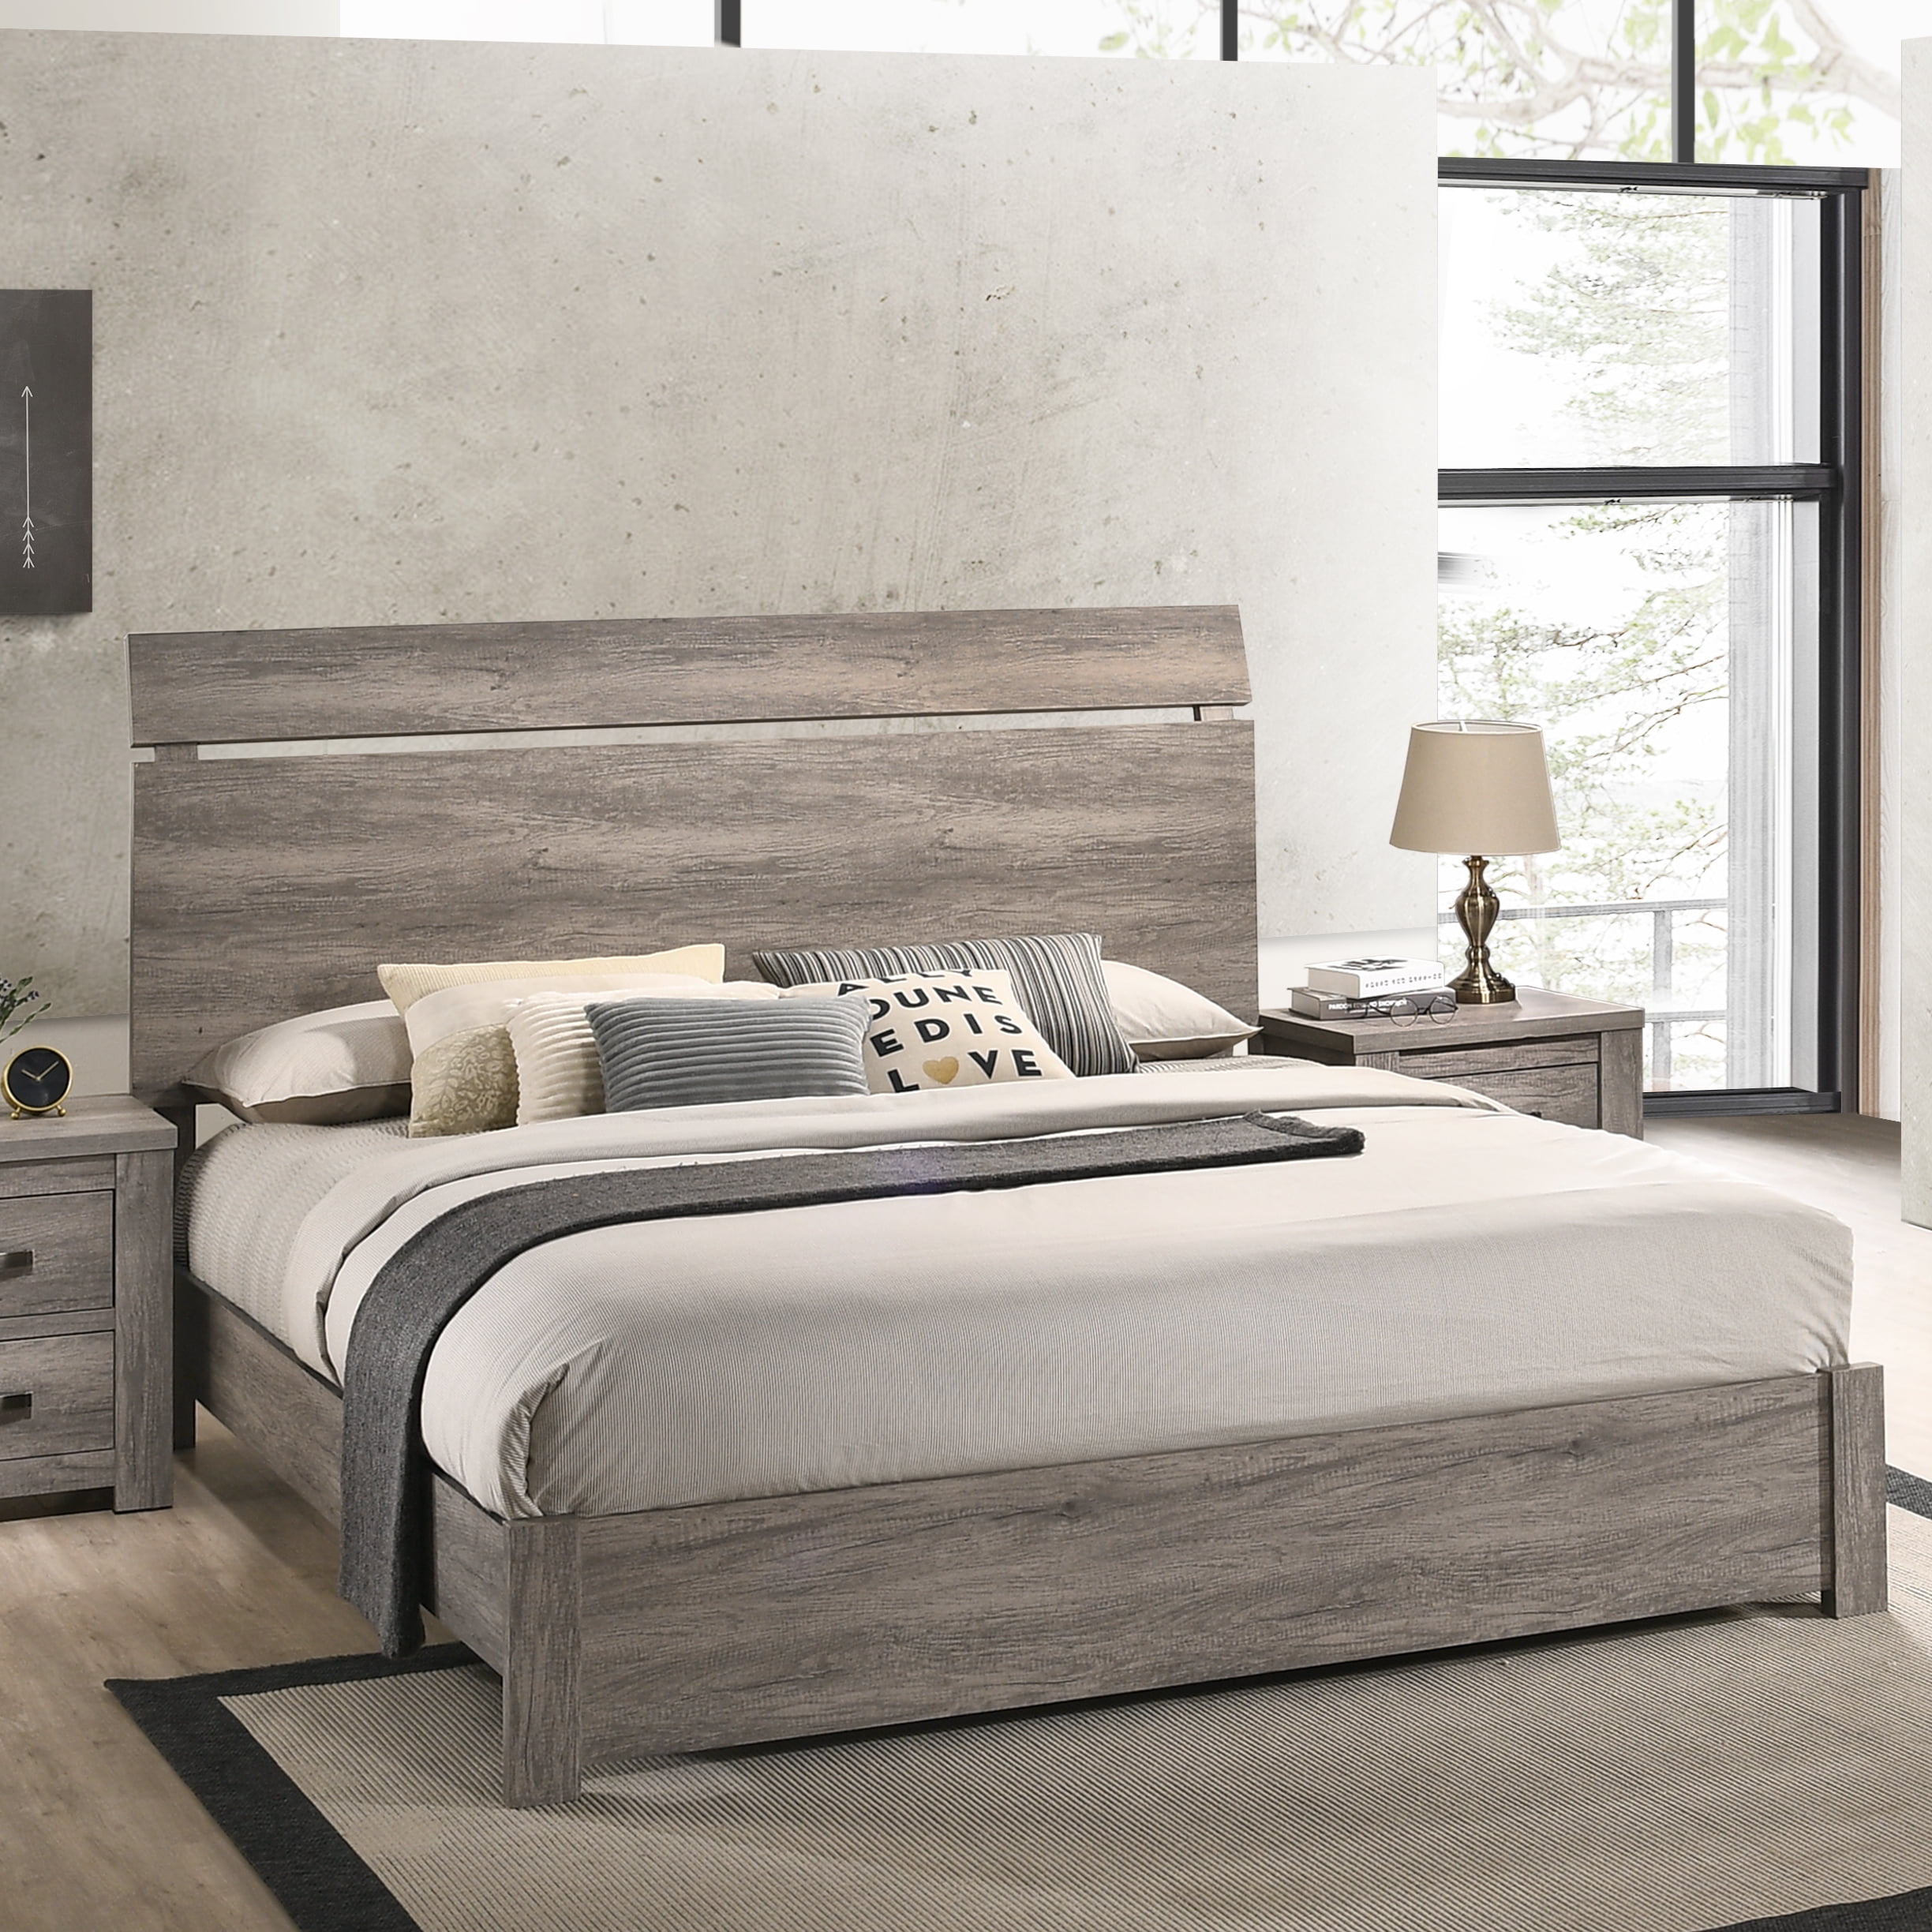 Floren Contemporary Weathered Gray Wood, Weathered Wood King Bed